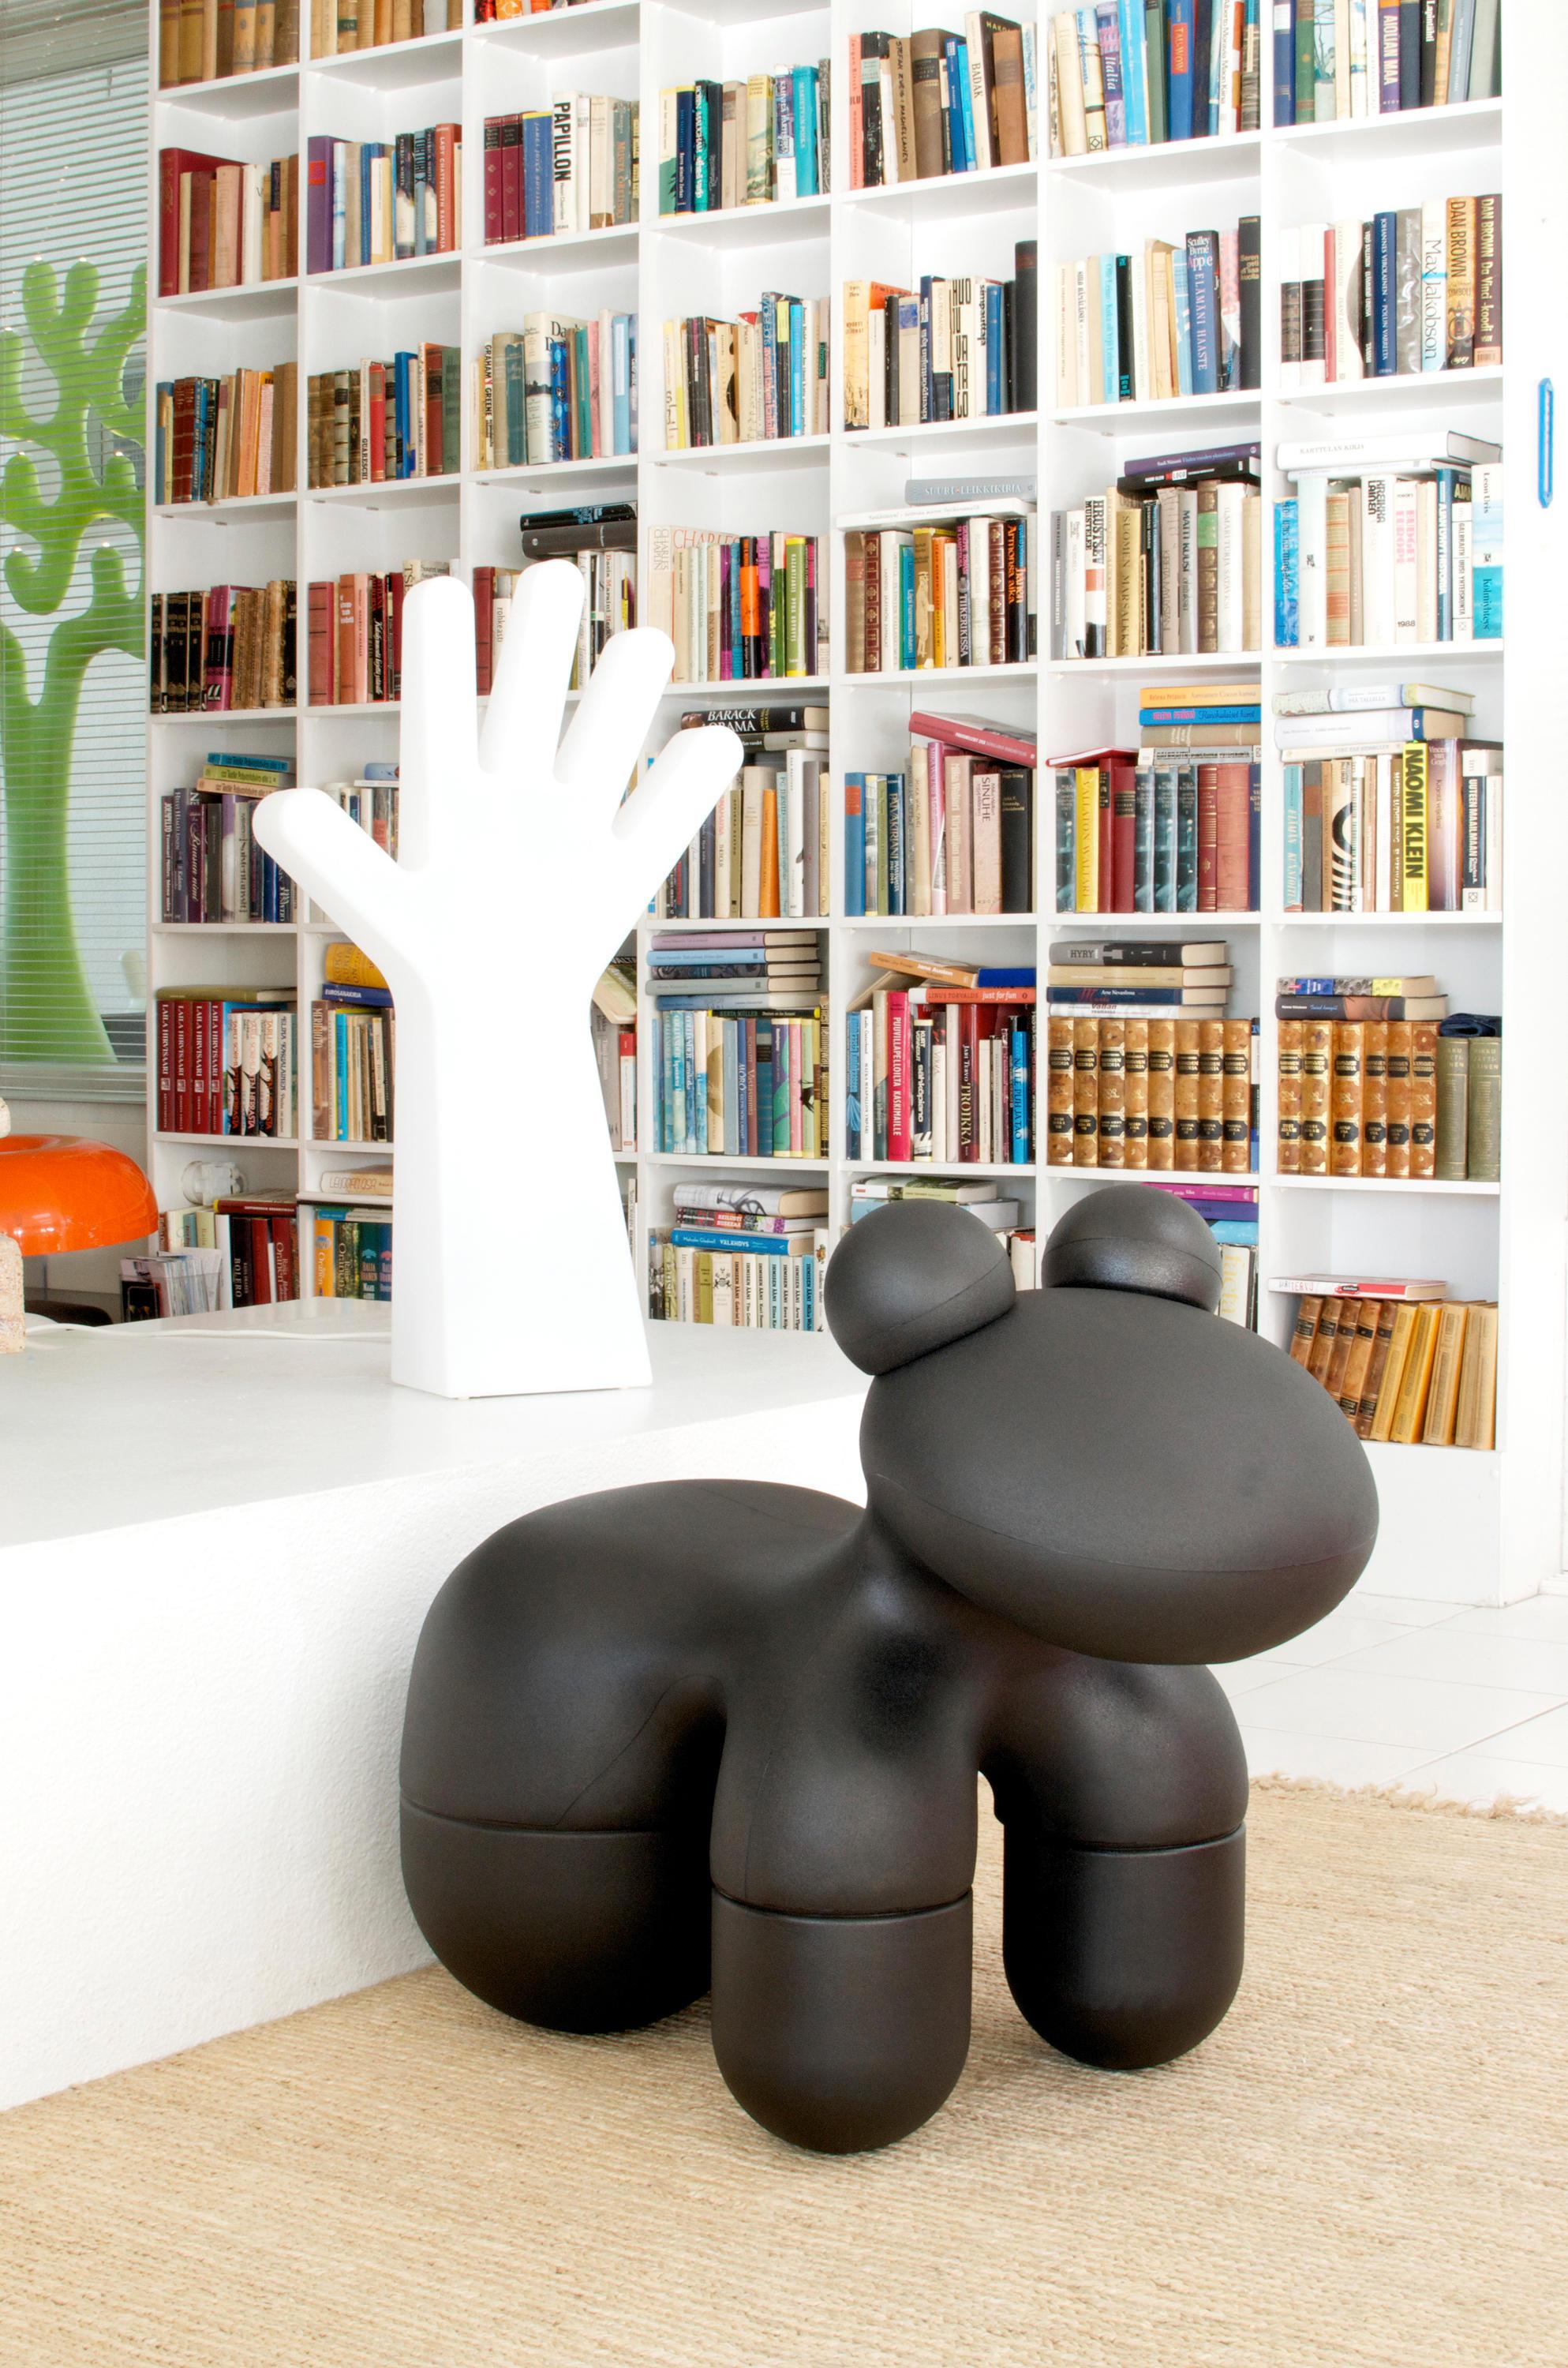 Pony is a friendly and characterful addition to any room, but as always, it was designed first and foremost to provide a comfortable seat. Pony has a moulded foam body, feet and ears which are all connected by a tube frame and upholstered in a